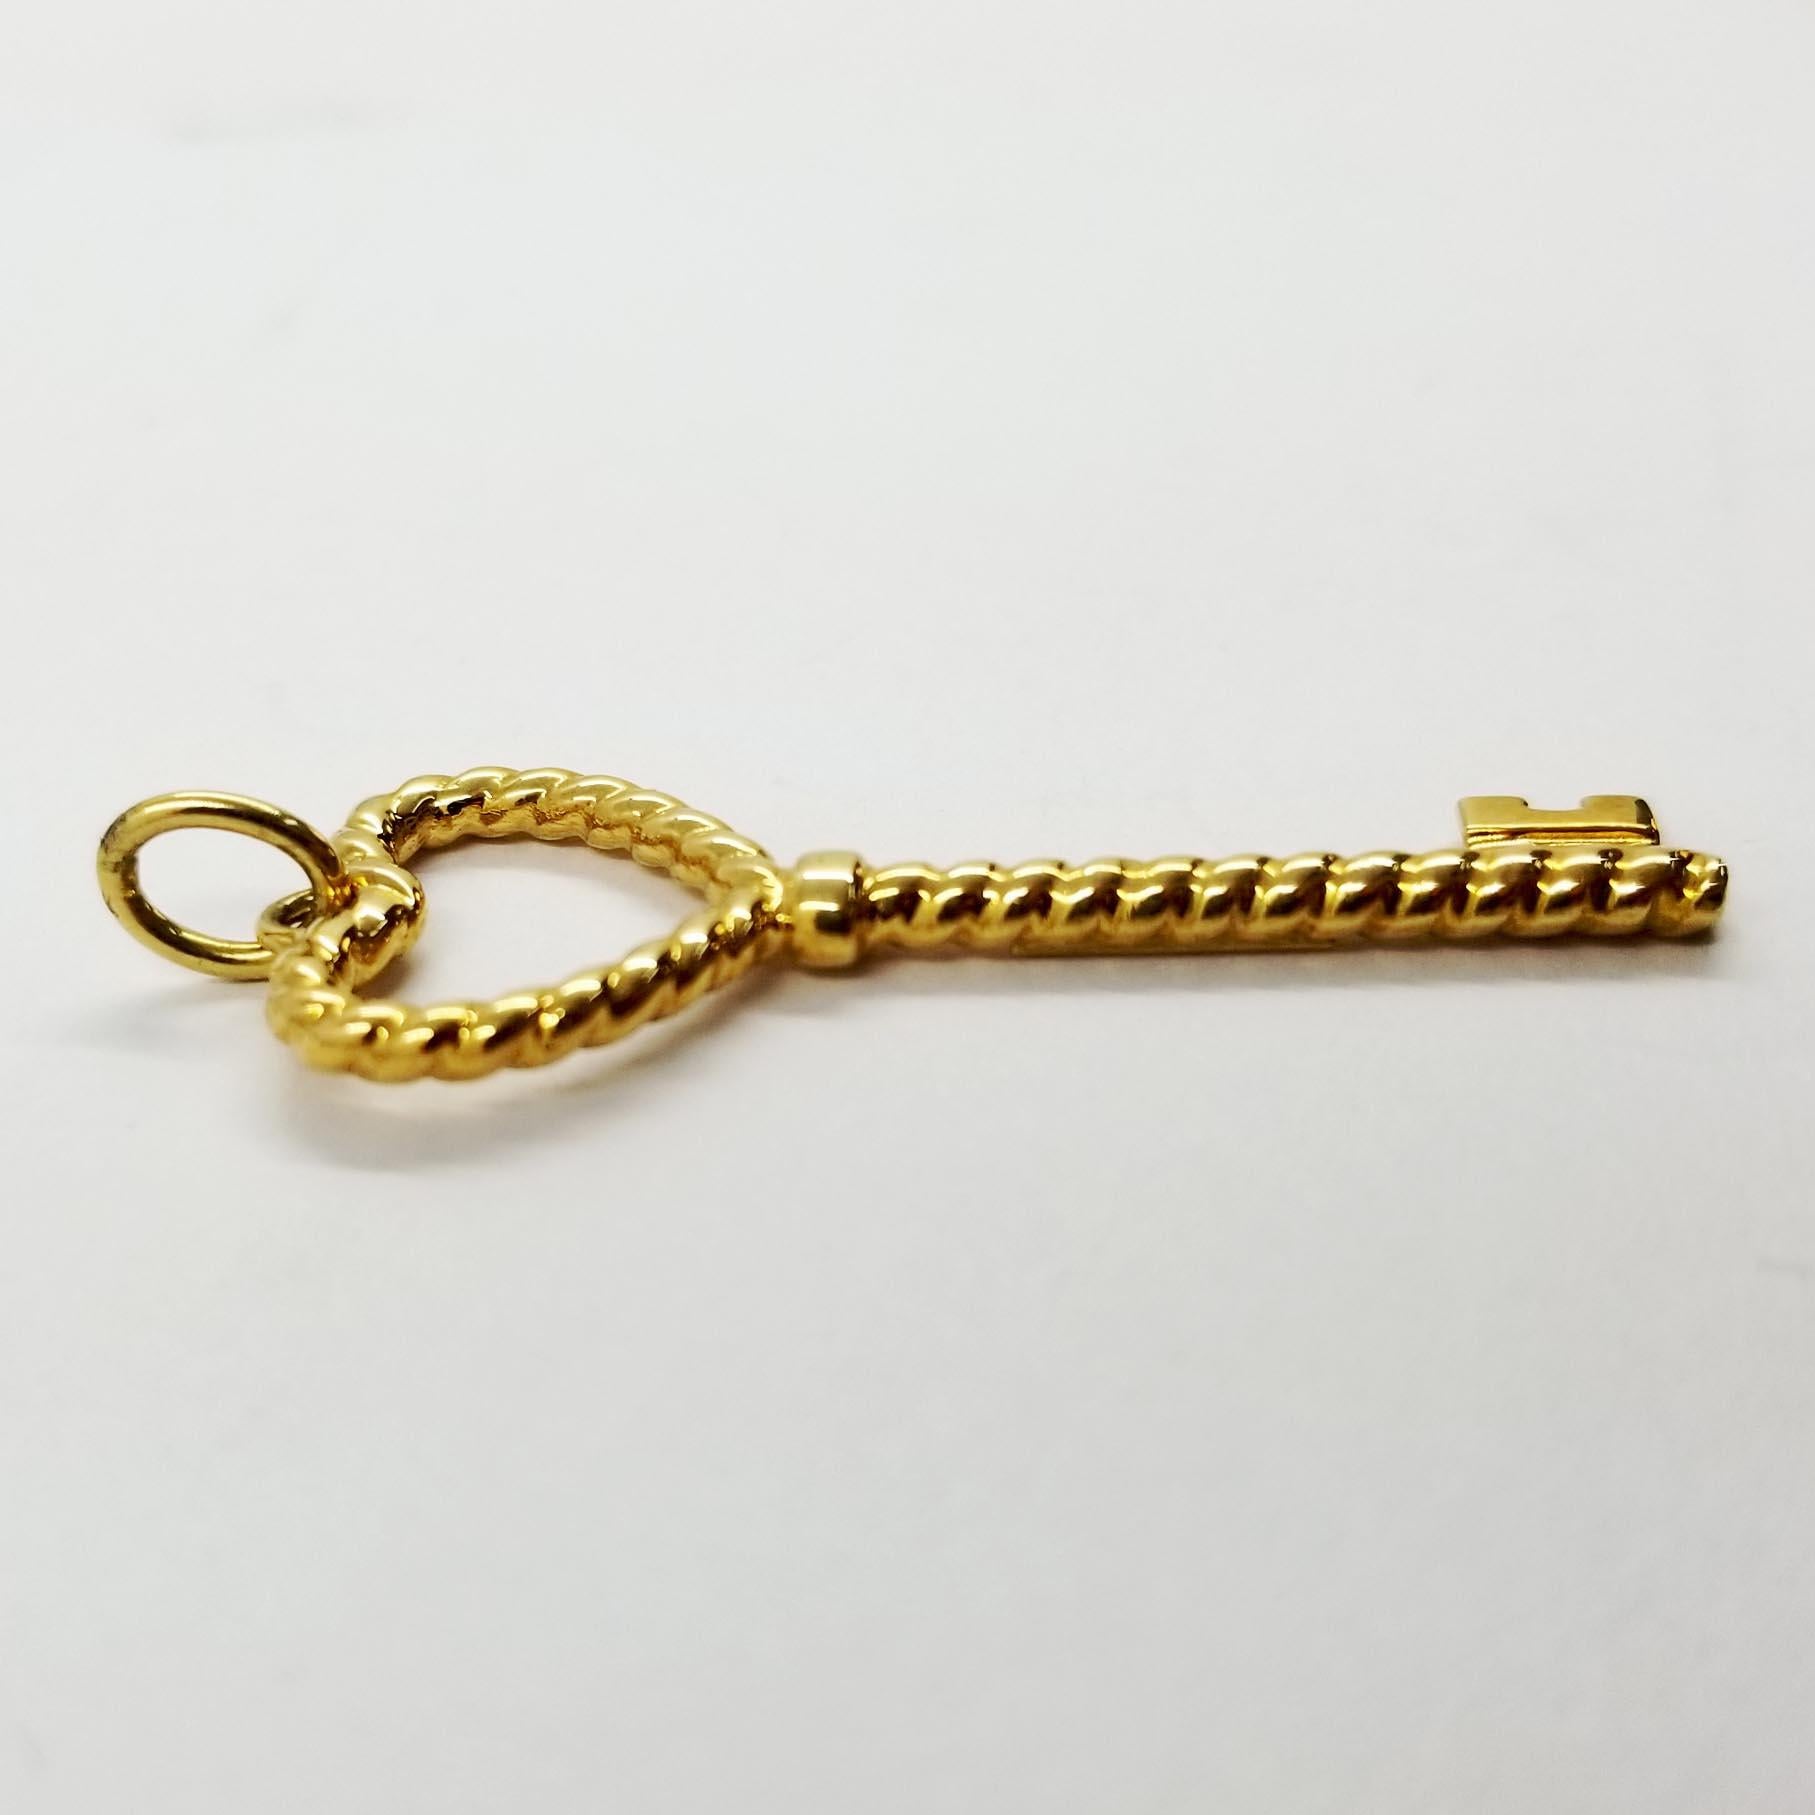 This elegant pendant from Tiffany and Co is crafted in 18 karat yellow gold. The key design features a rope texture with the shape of a heart at the top. The entire pendant swings freely from a simple bale. The back is engraved T&Co 750 Italy. The